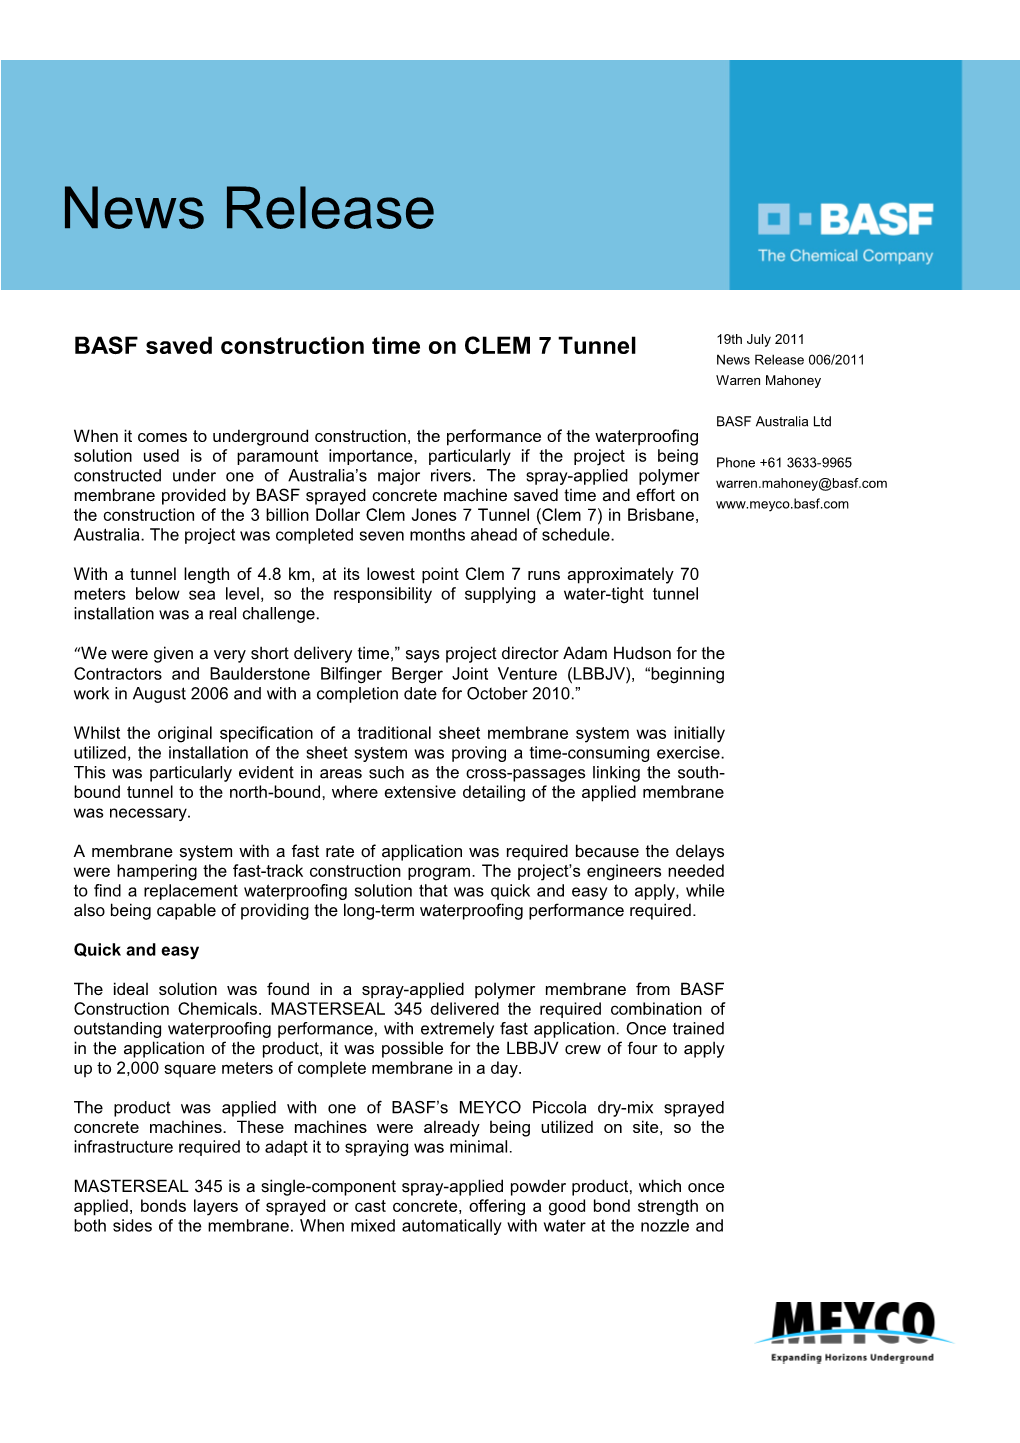 BASF Saved Construction Time on CLEM 7 Tunnel